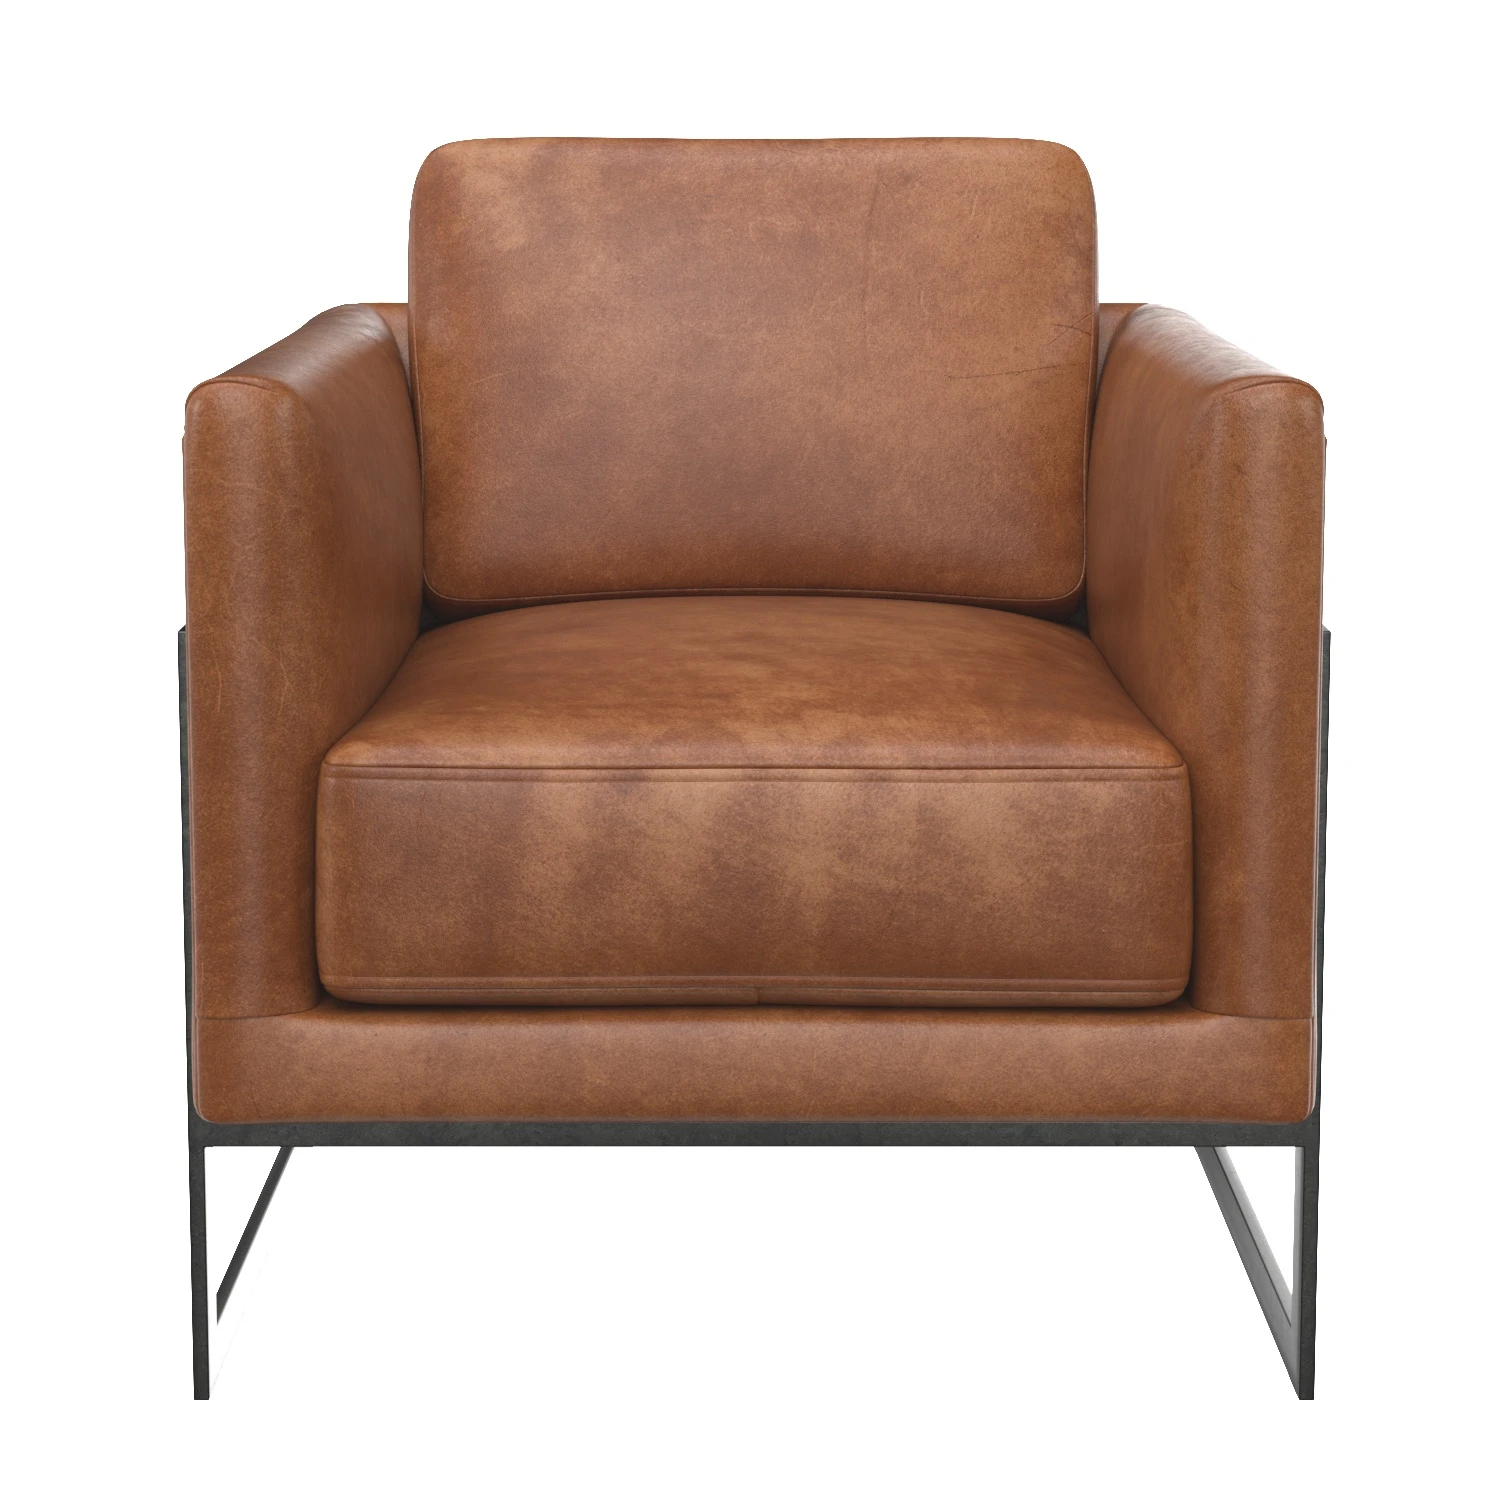 Luxley Club Chair Open Road Brown Leather 3D Model_04